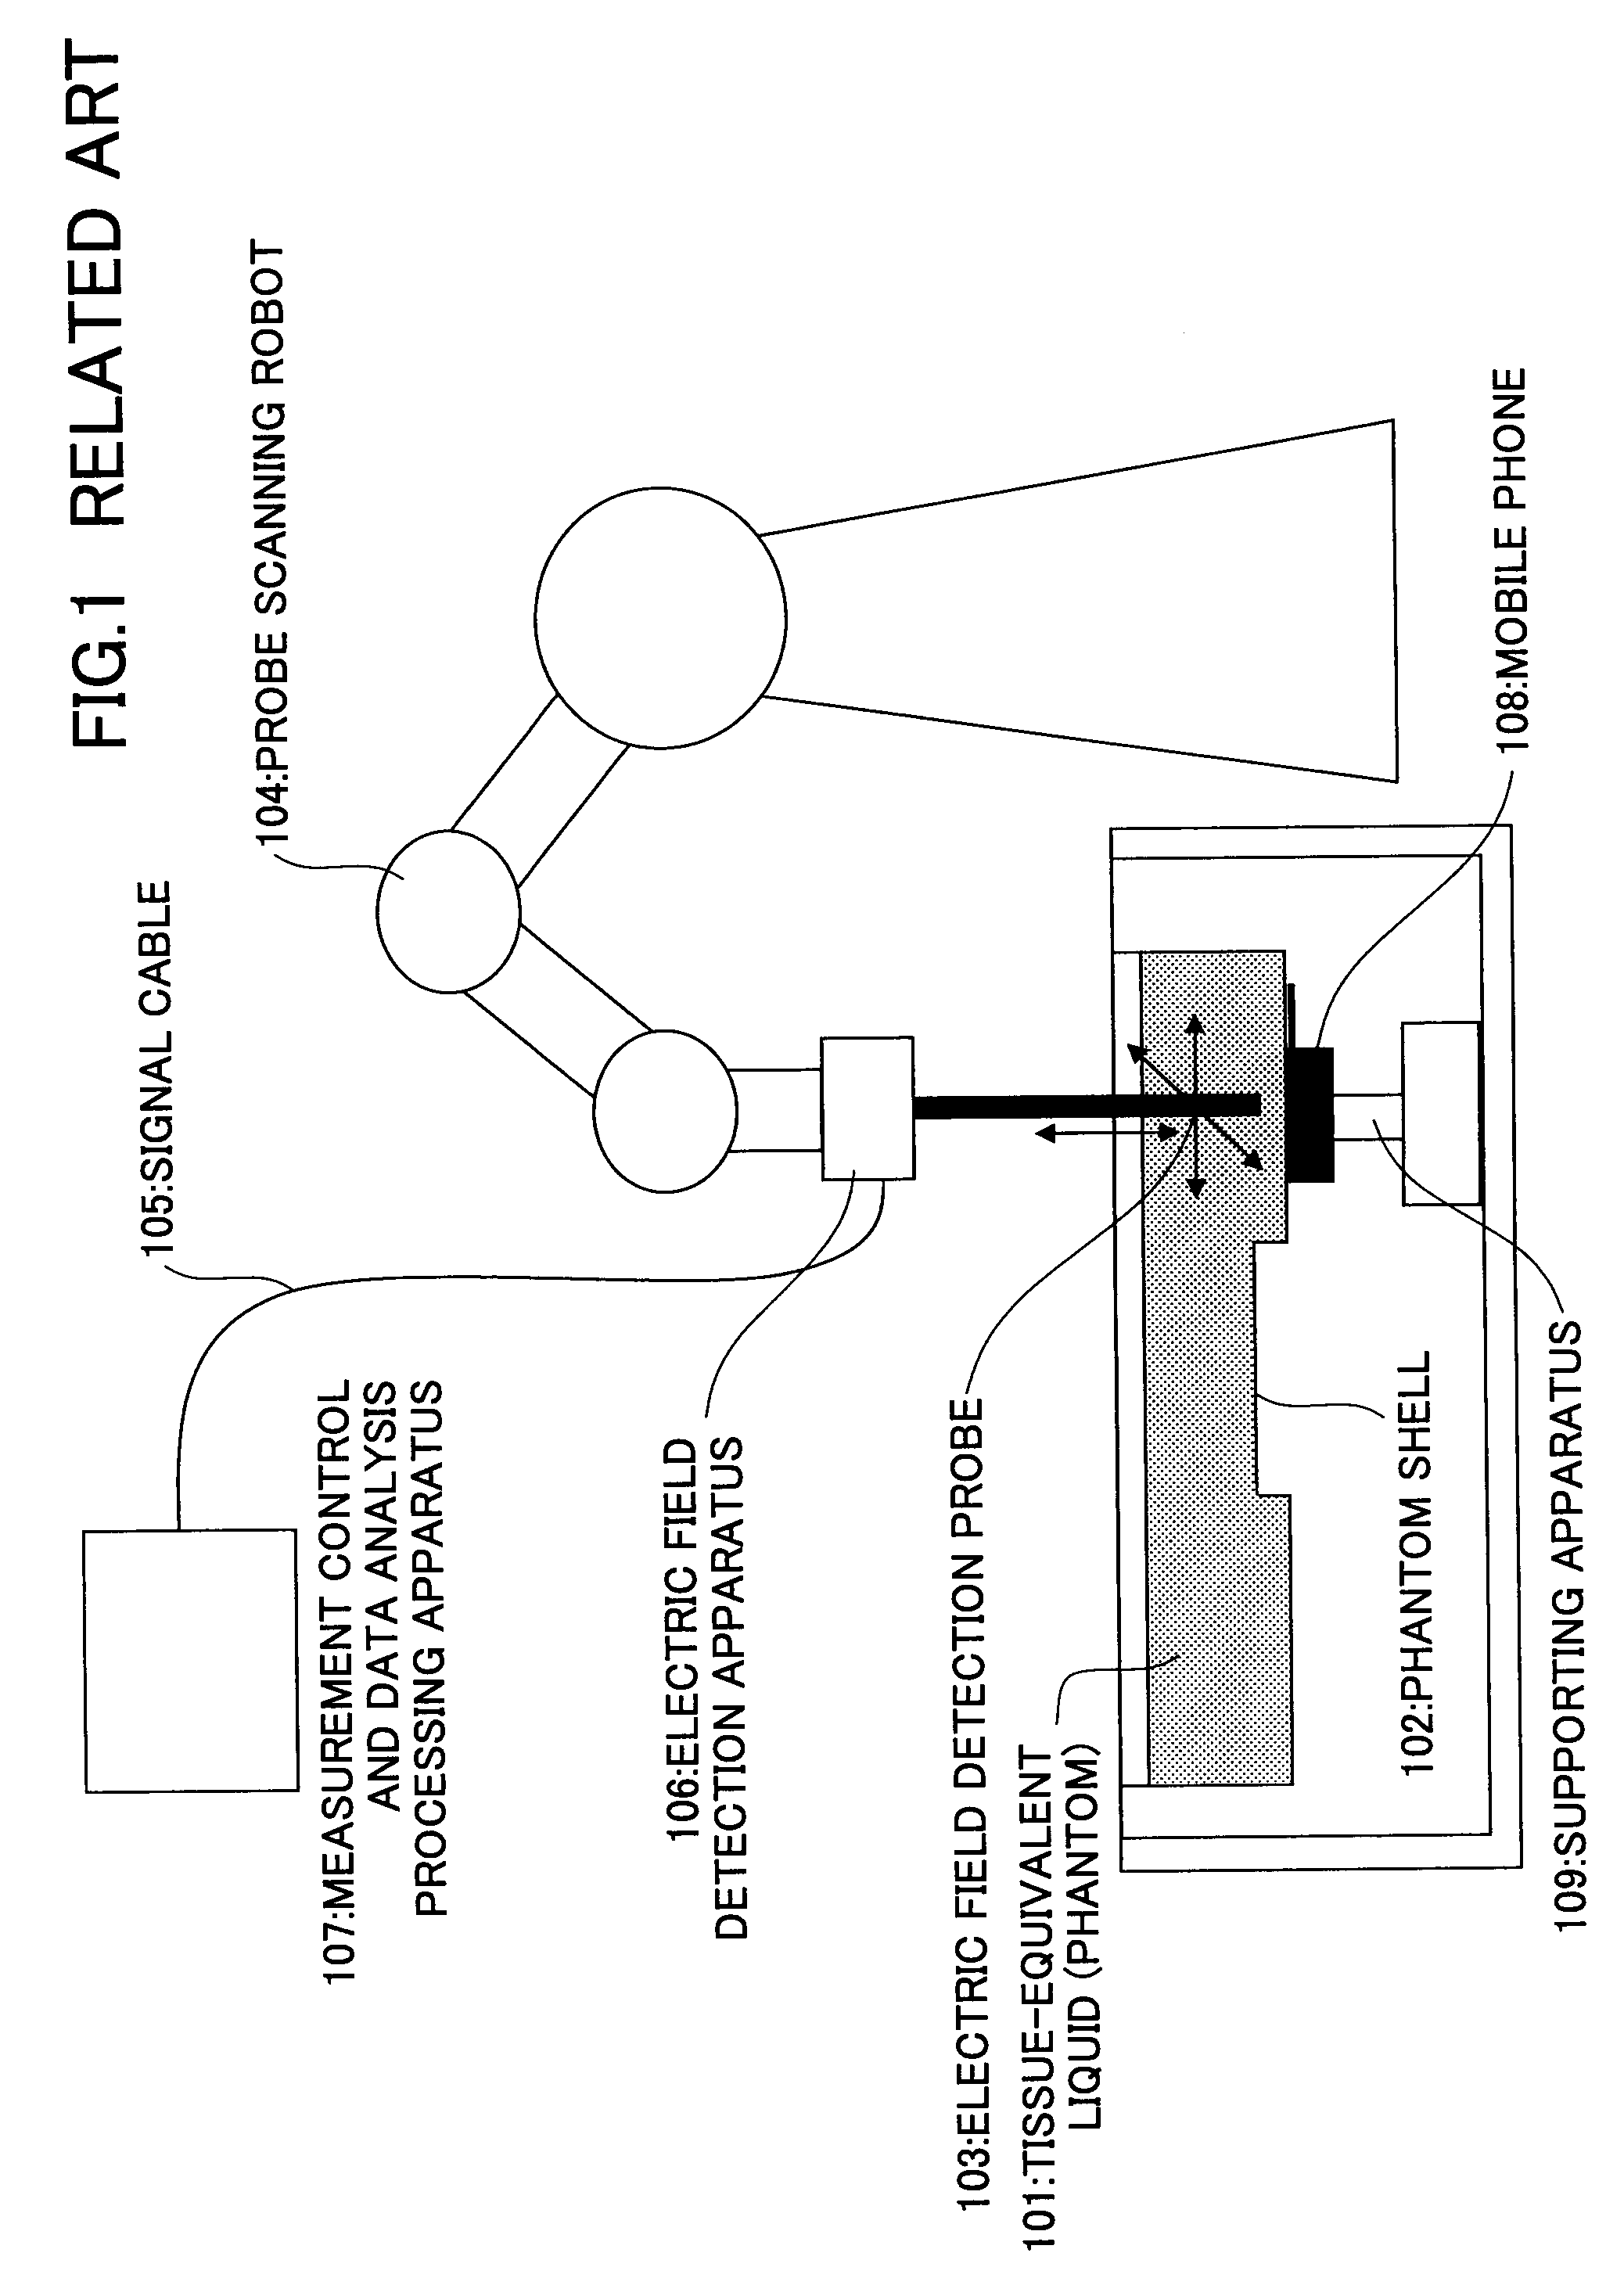 Specific absorption rate measurement system and method